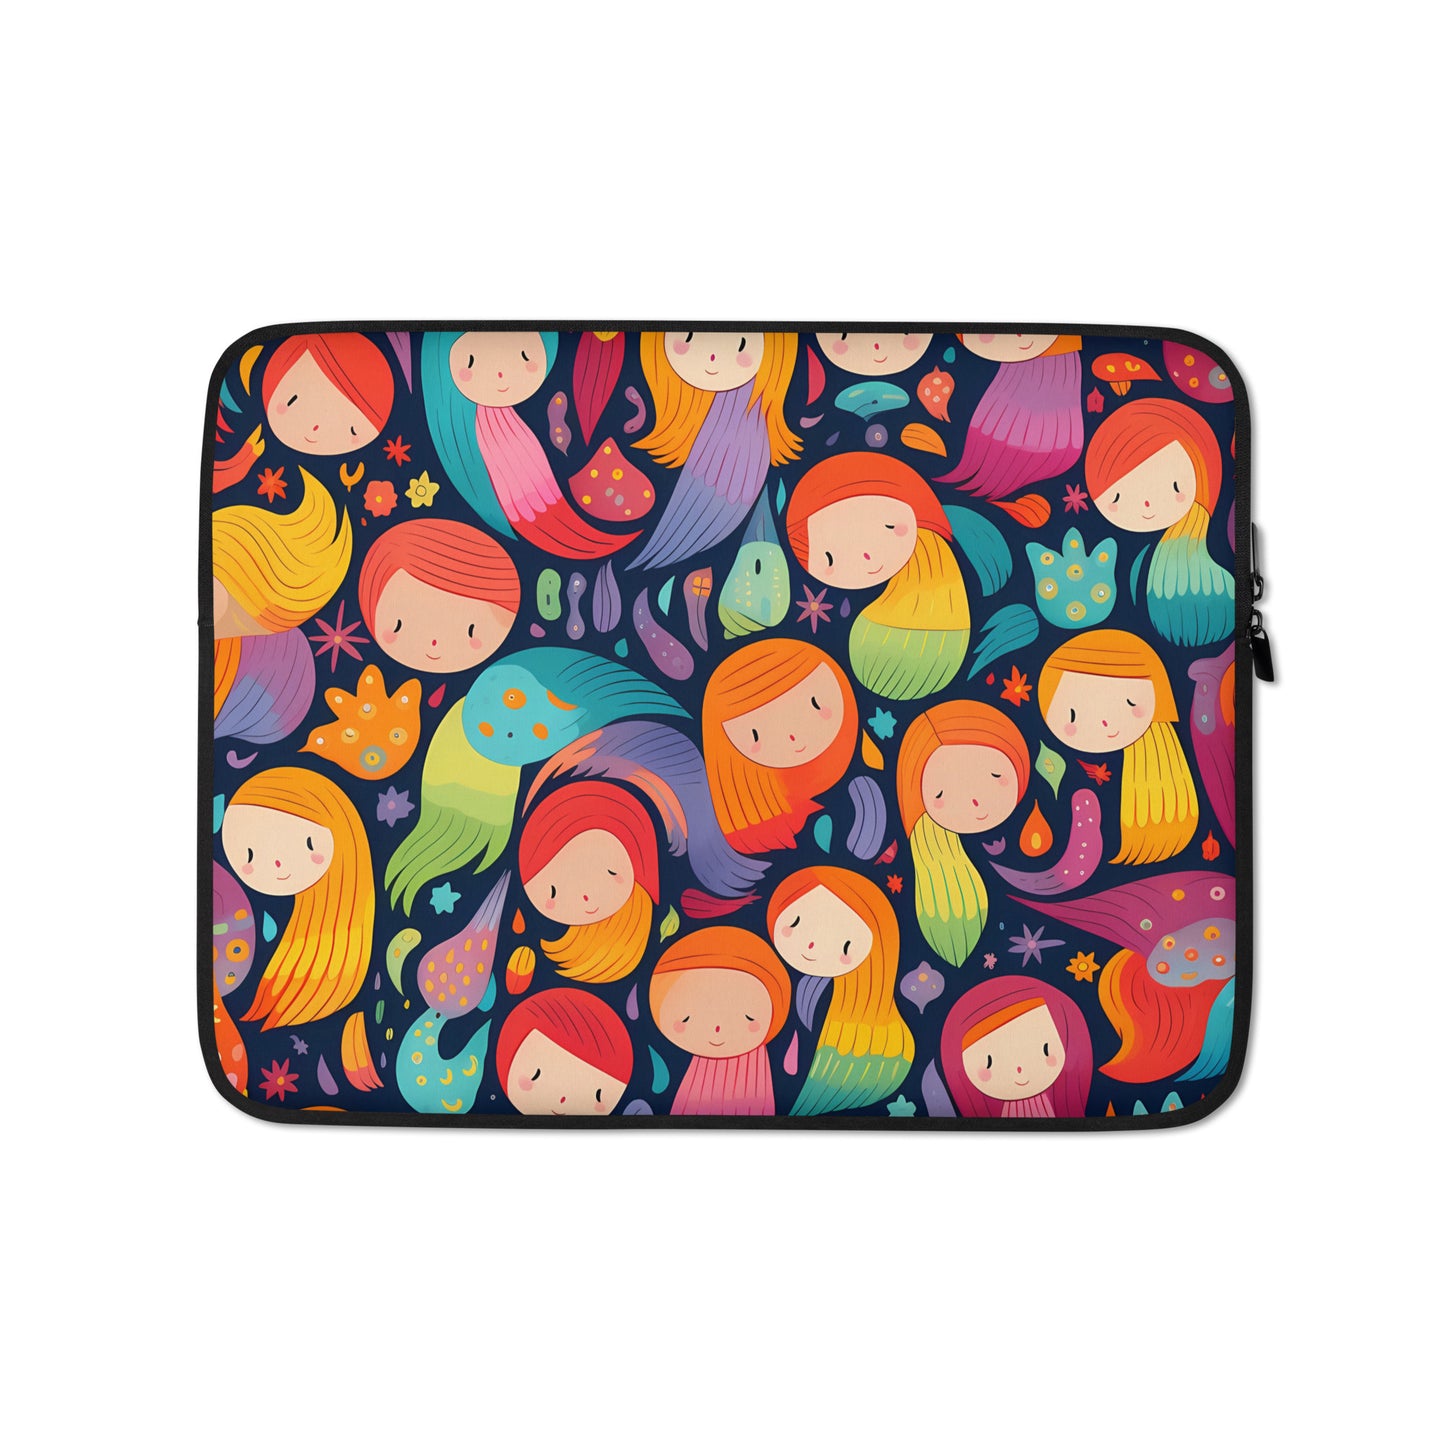 Smiley Faces Laptop Sleeve